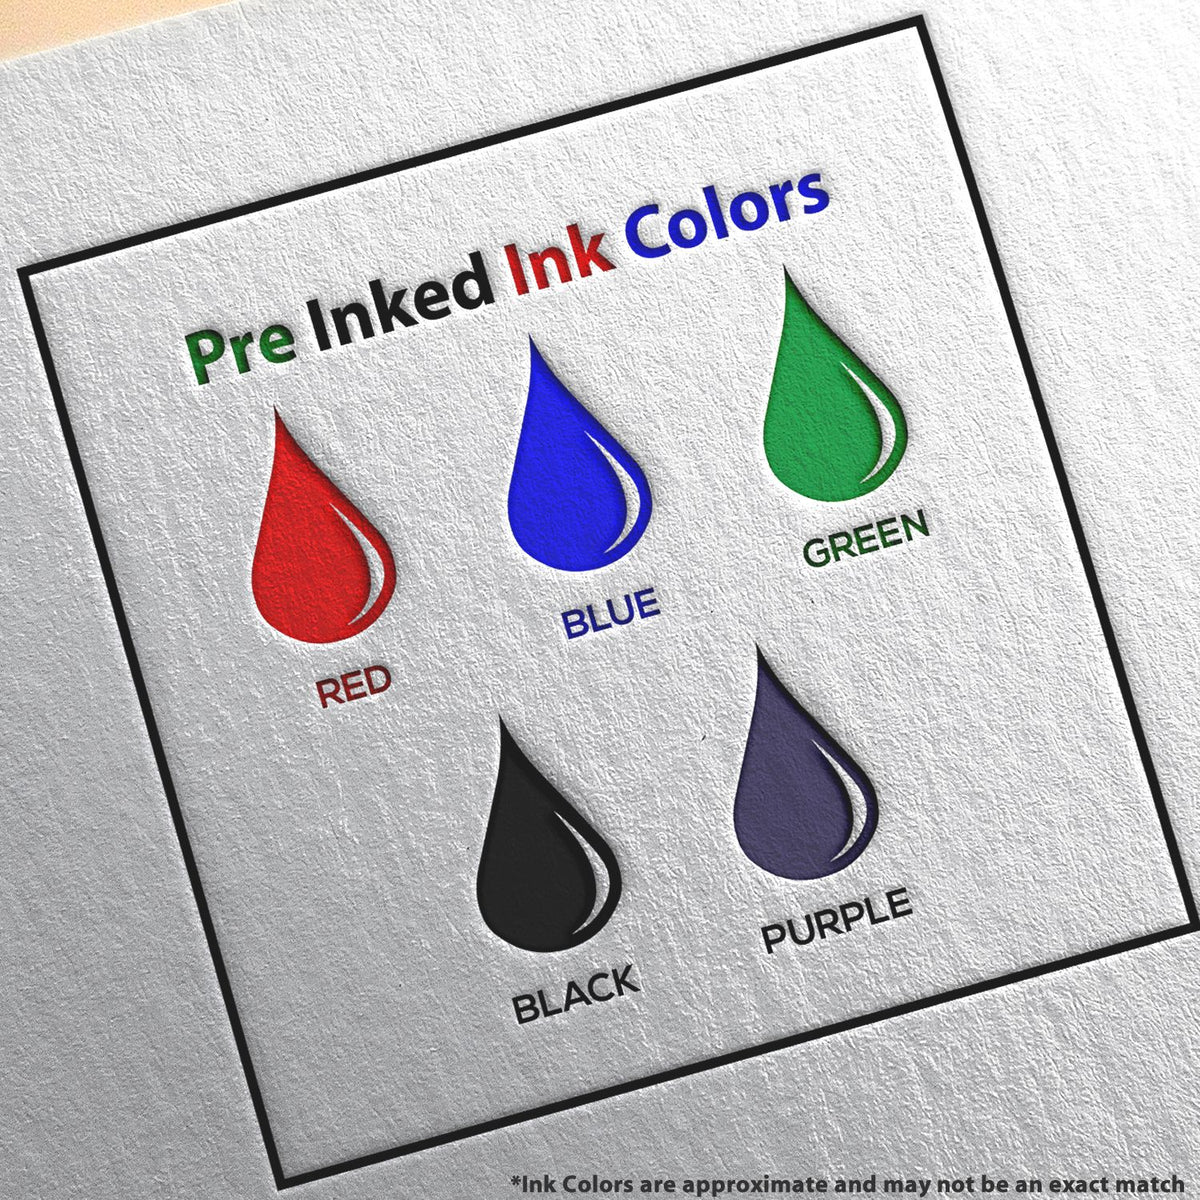 A picture showing the different ink colors or hues available for the Slim Pre-Inked Indiana Architect Seal Stamp product.